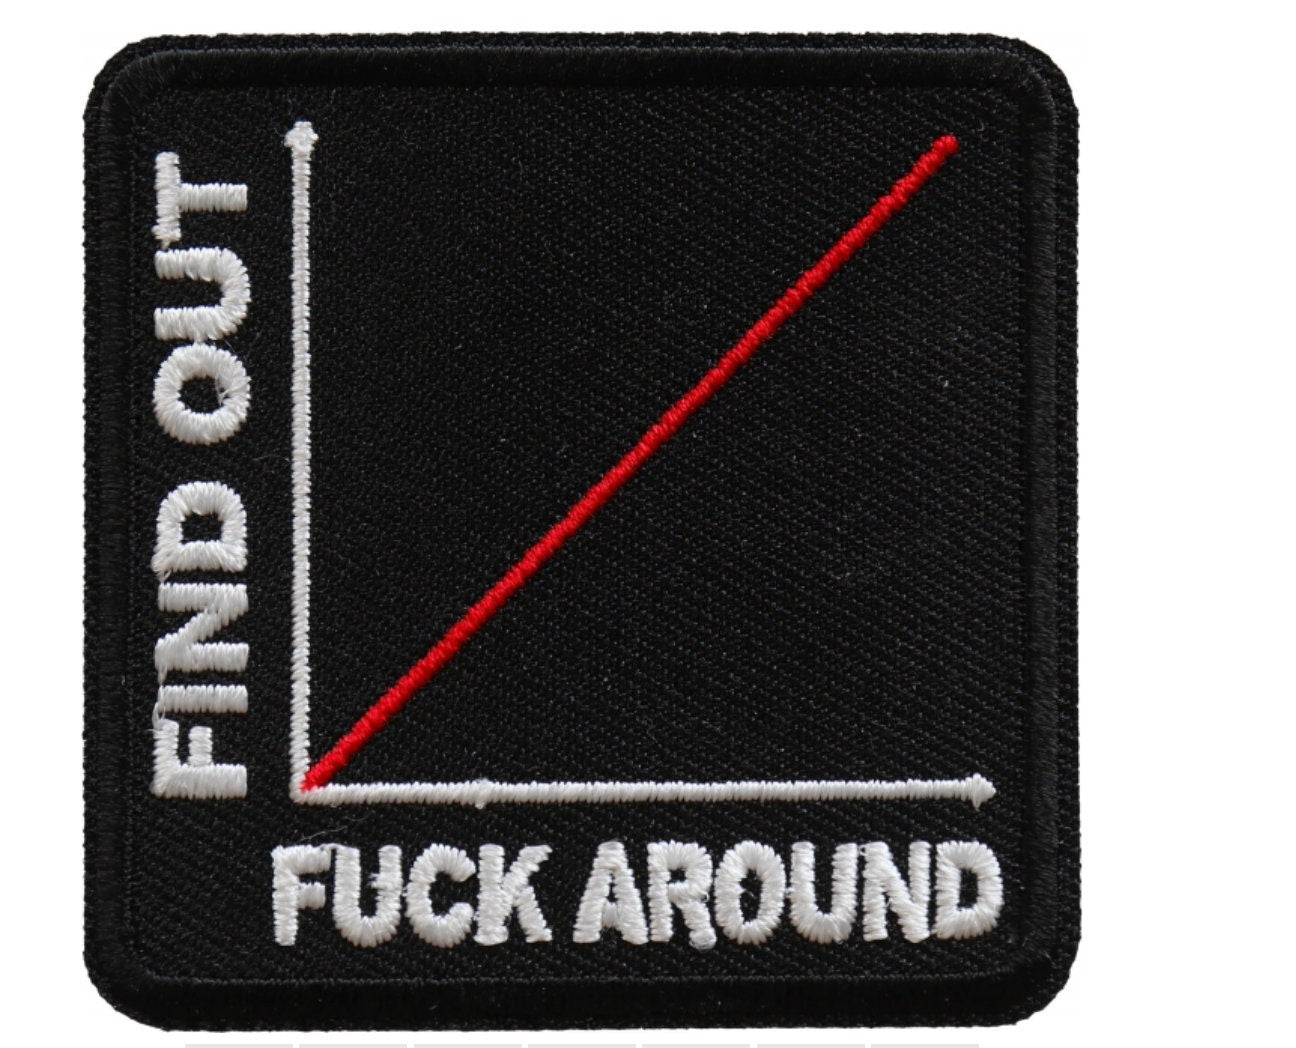 FAFO Patch Iron On Patch, Range Day Humor Morale Patch – Redstone